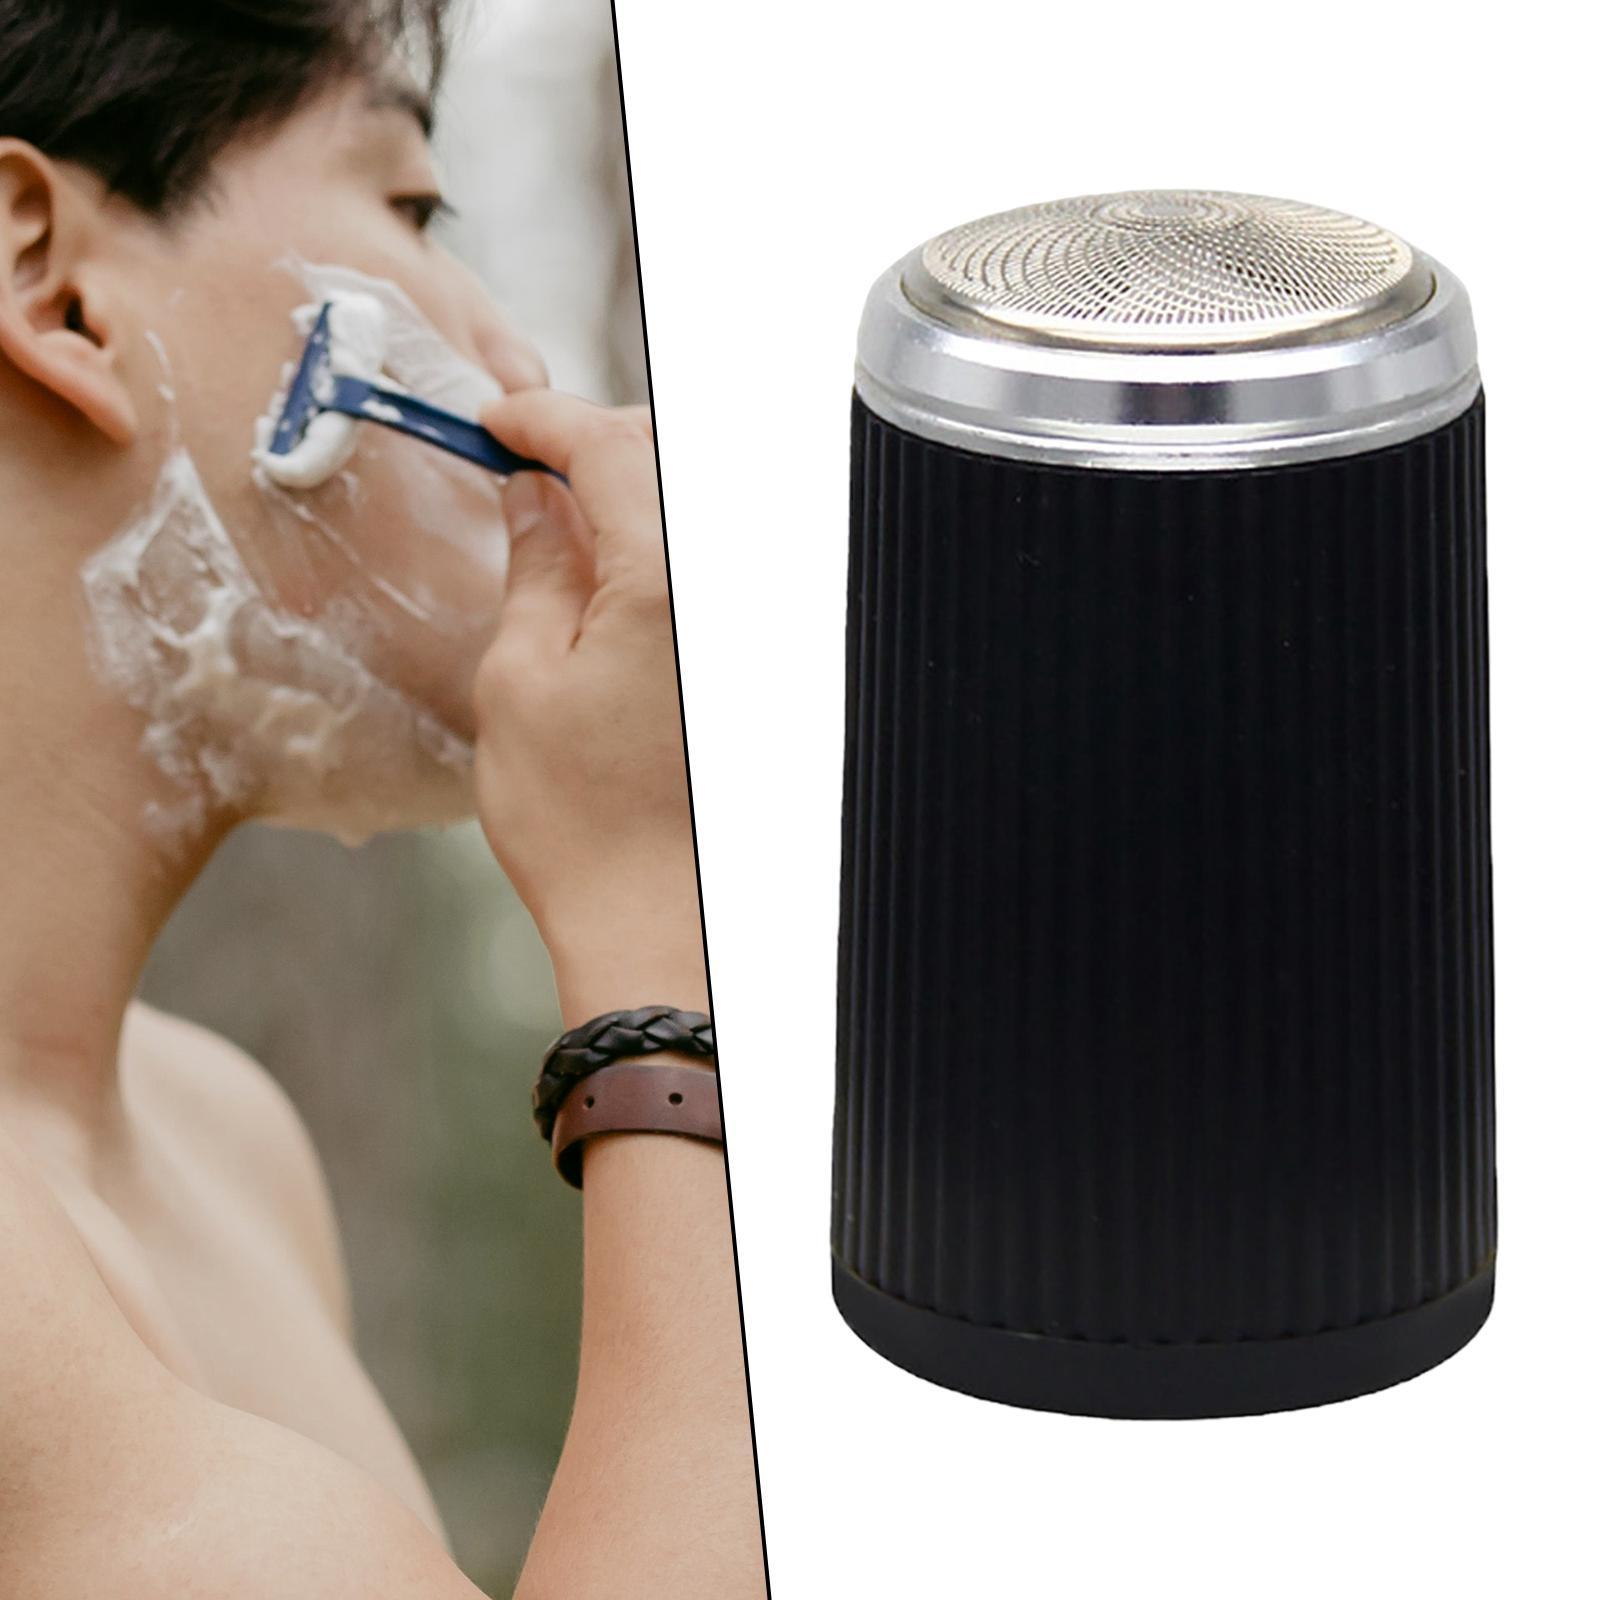 Portable Mini Electric Shaver for Men Facial Hair Remover USB Charging Shaving Machine Beard Trimmer Low Noise Wet Dry Use 0.1mm Blade